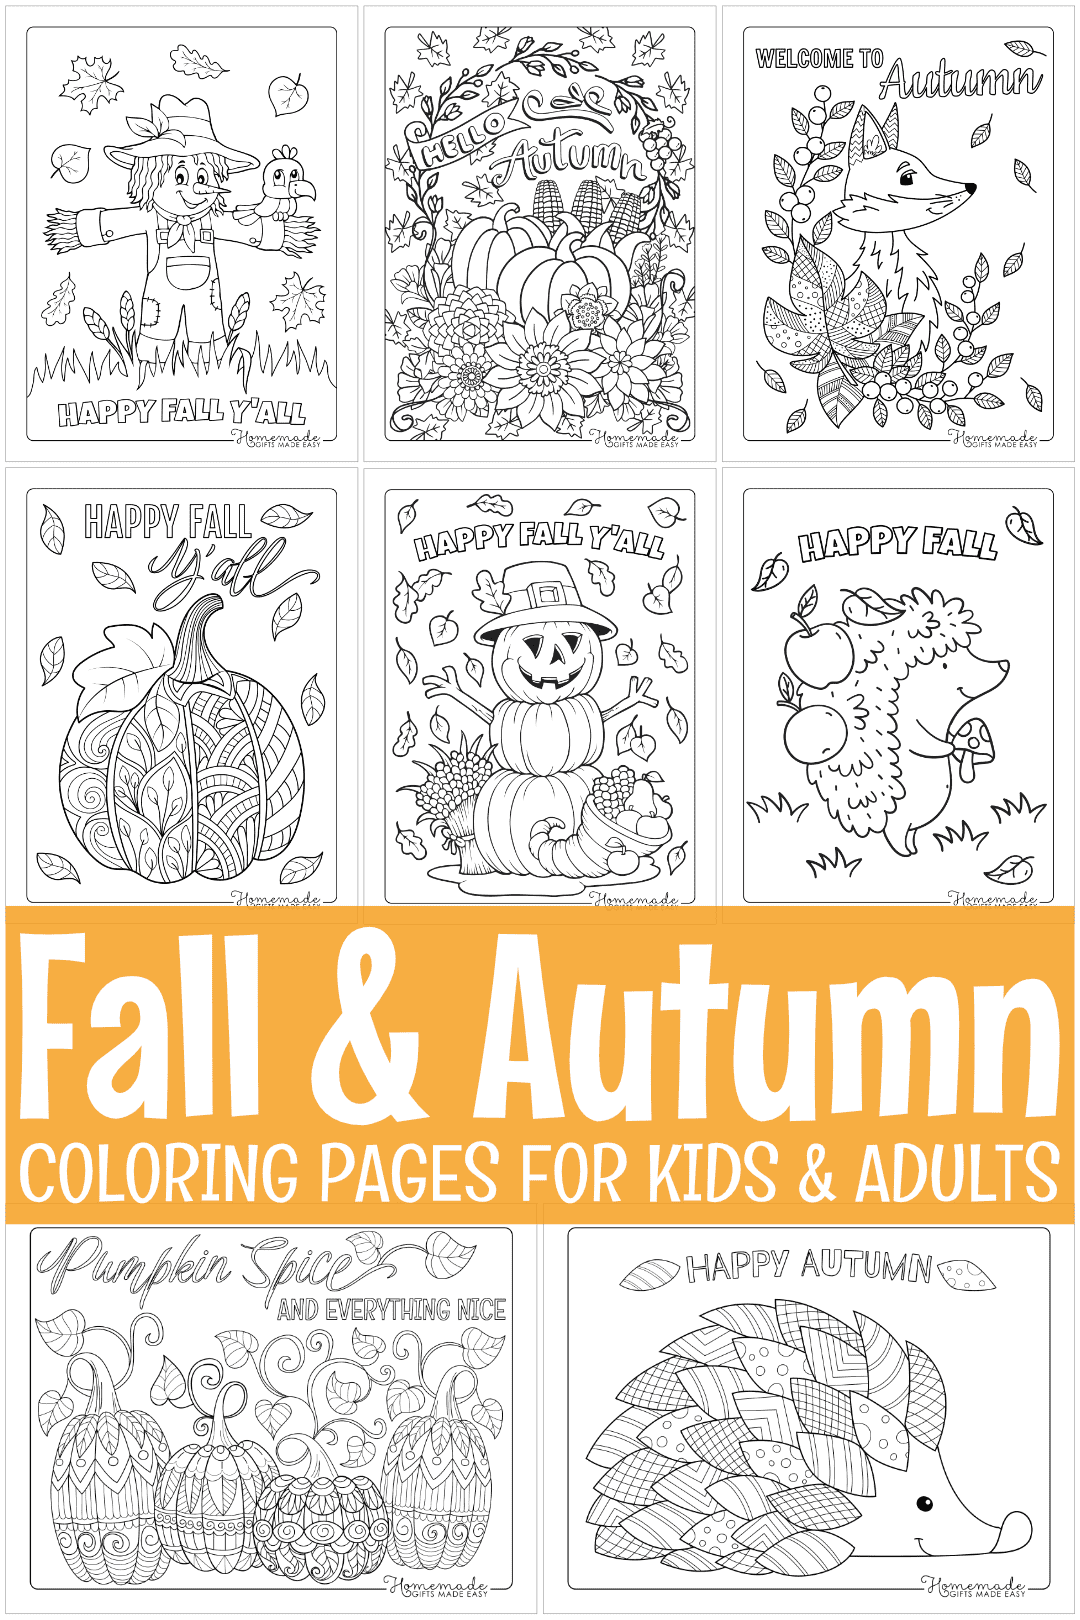 20 Autumn & Fall Coloring Pages